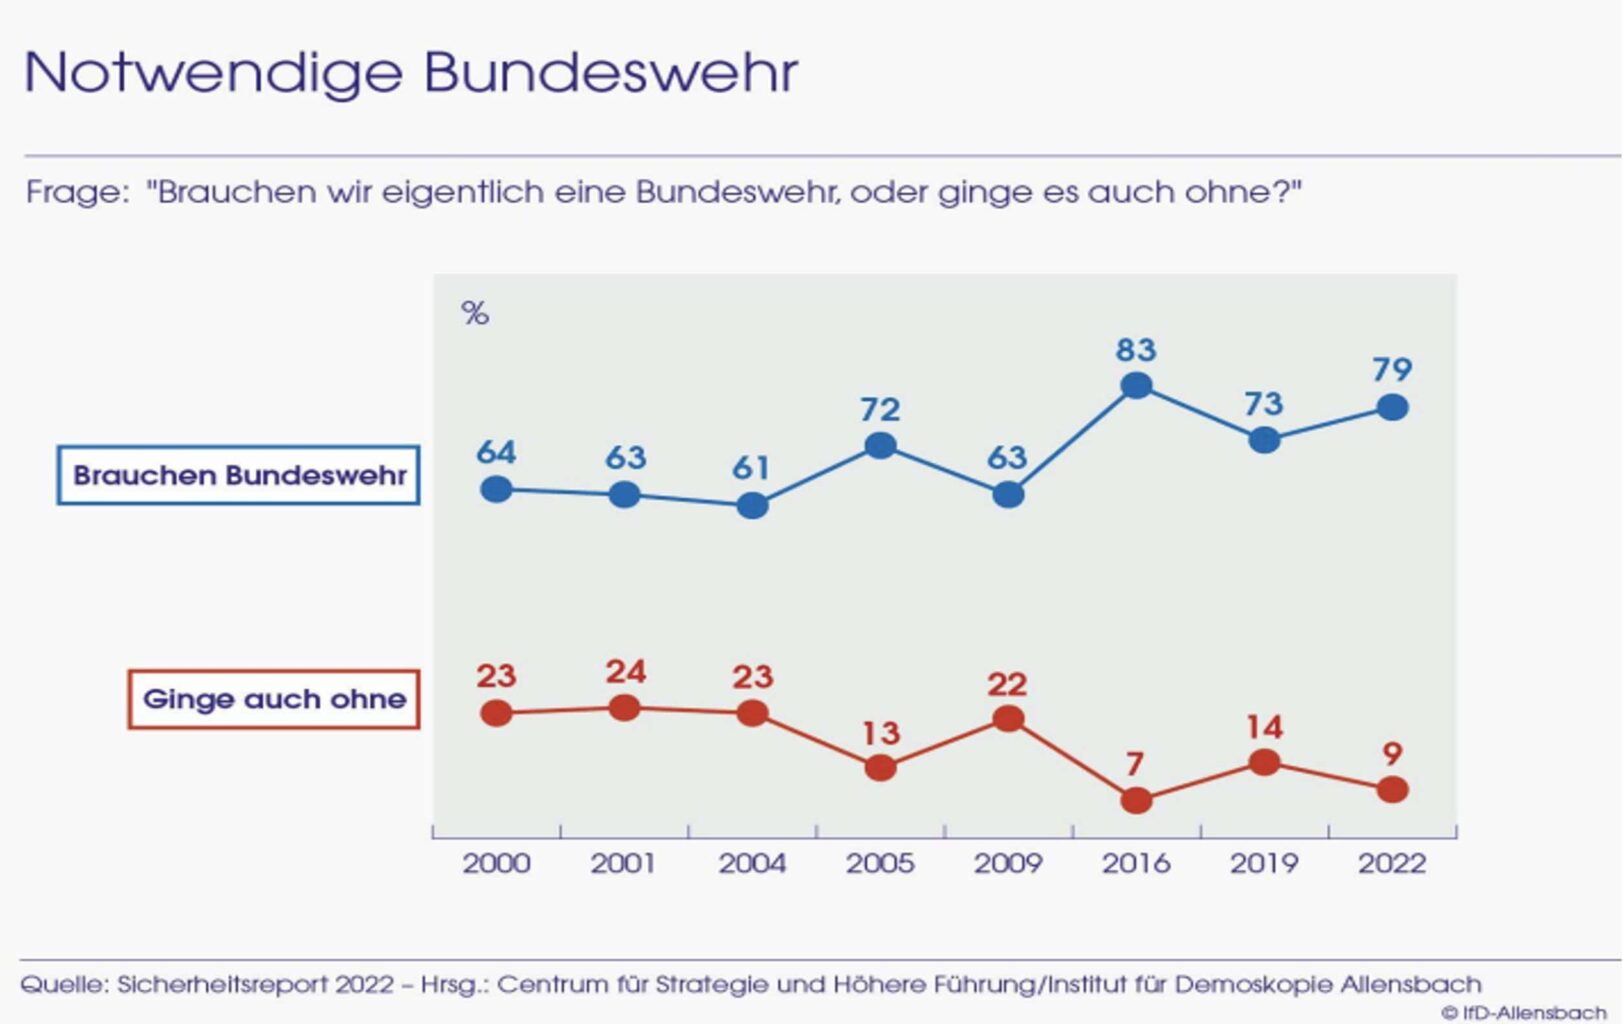 Figure 1 The figure shows the development of German public opinion on the necessity of maintaining the Bundeswehr